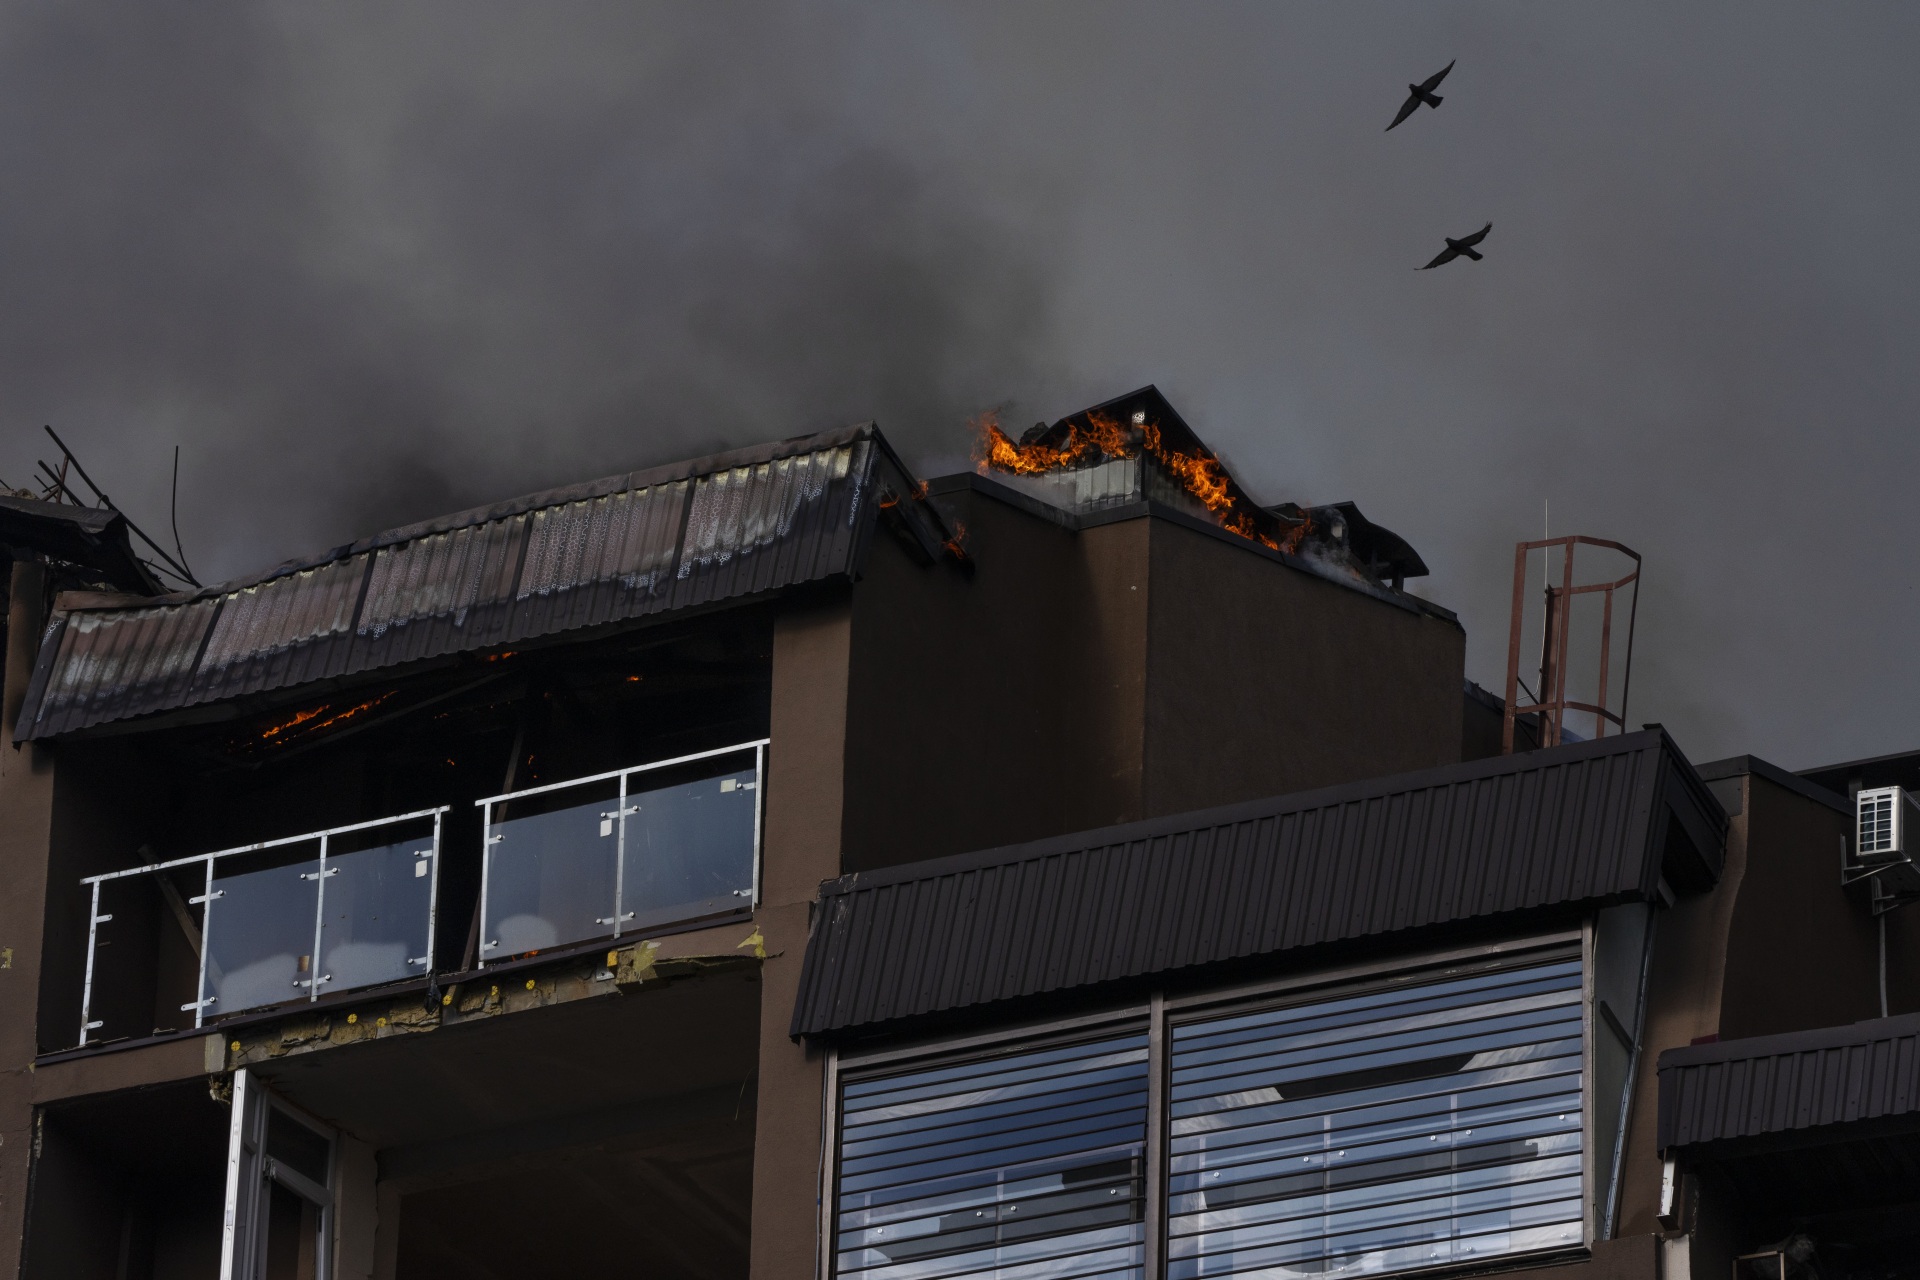 Birds fly over a residential building following explosions, in Kyiv, Ukraine, Sunday, June 26, 2022. Several explosions rocked the west of the Ukrainian capital in the early hours of Sunday morning, with at least two residential buildings struck, according to Kyiv mayor Vitali Klitschko. (AP Photo/Nariman El-Mofty)